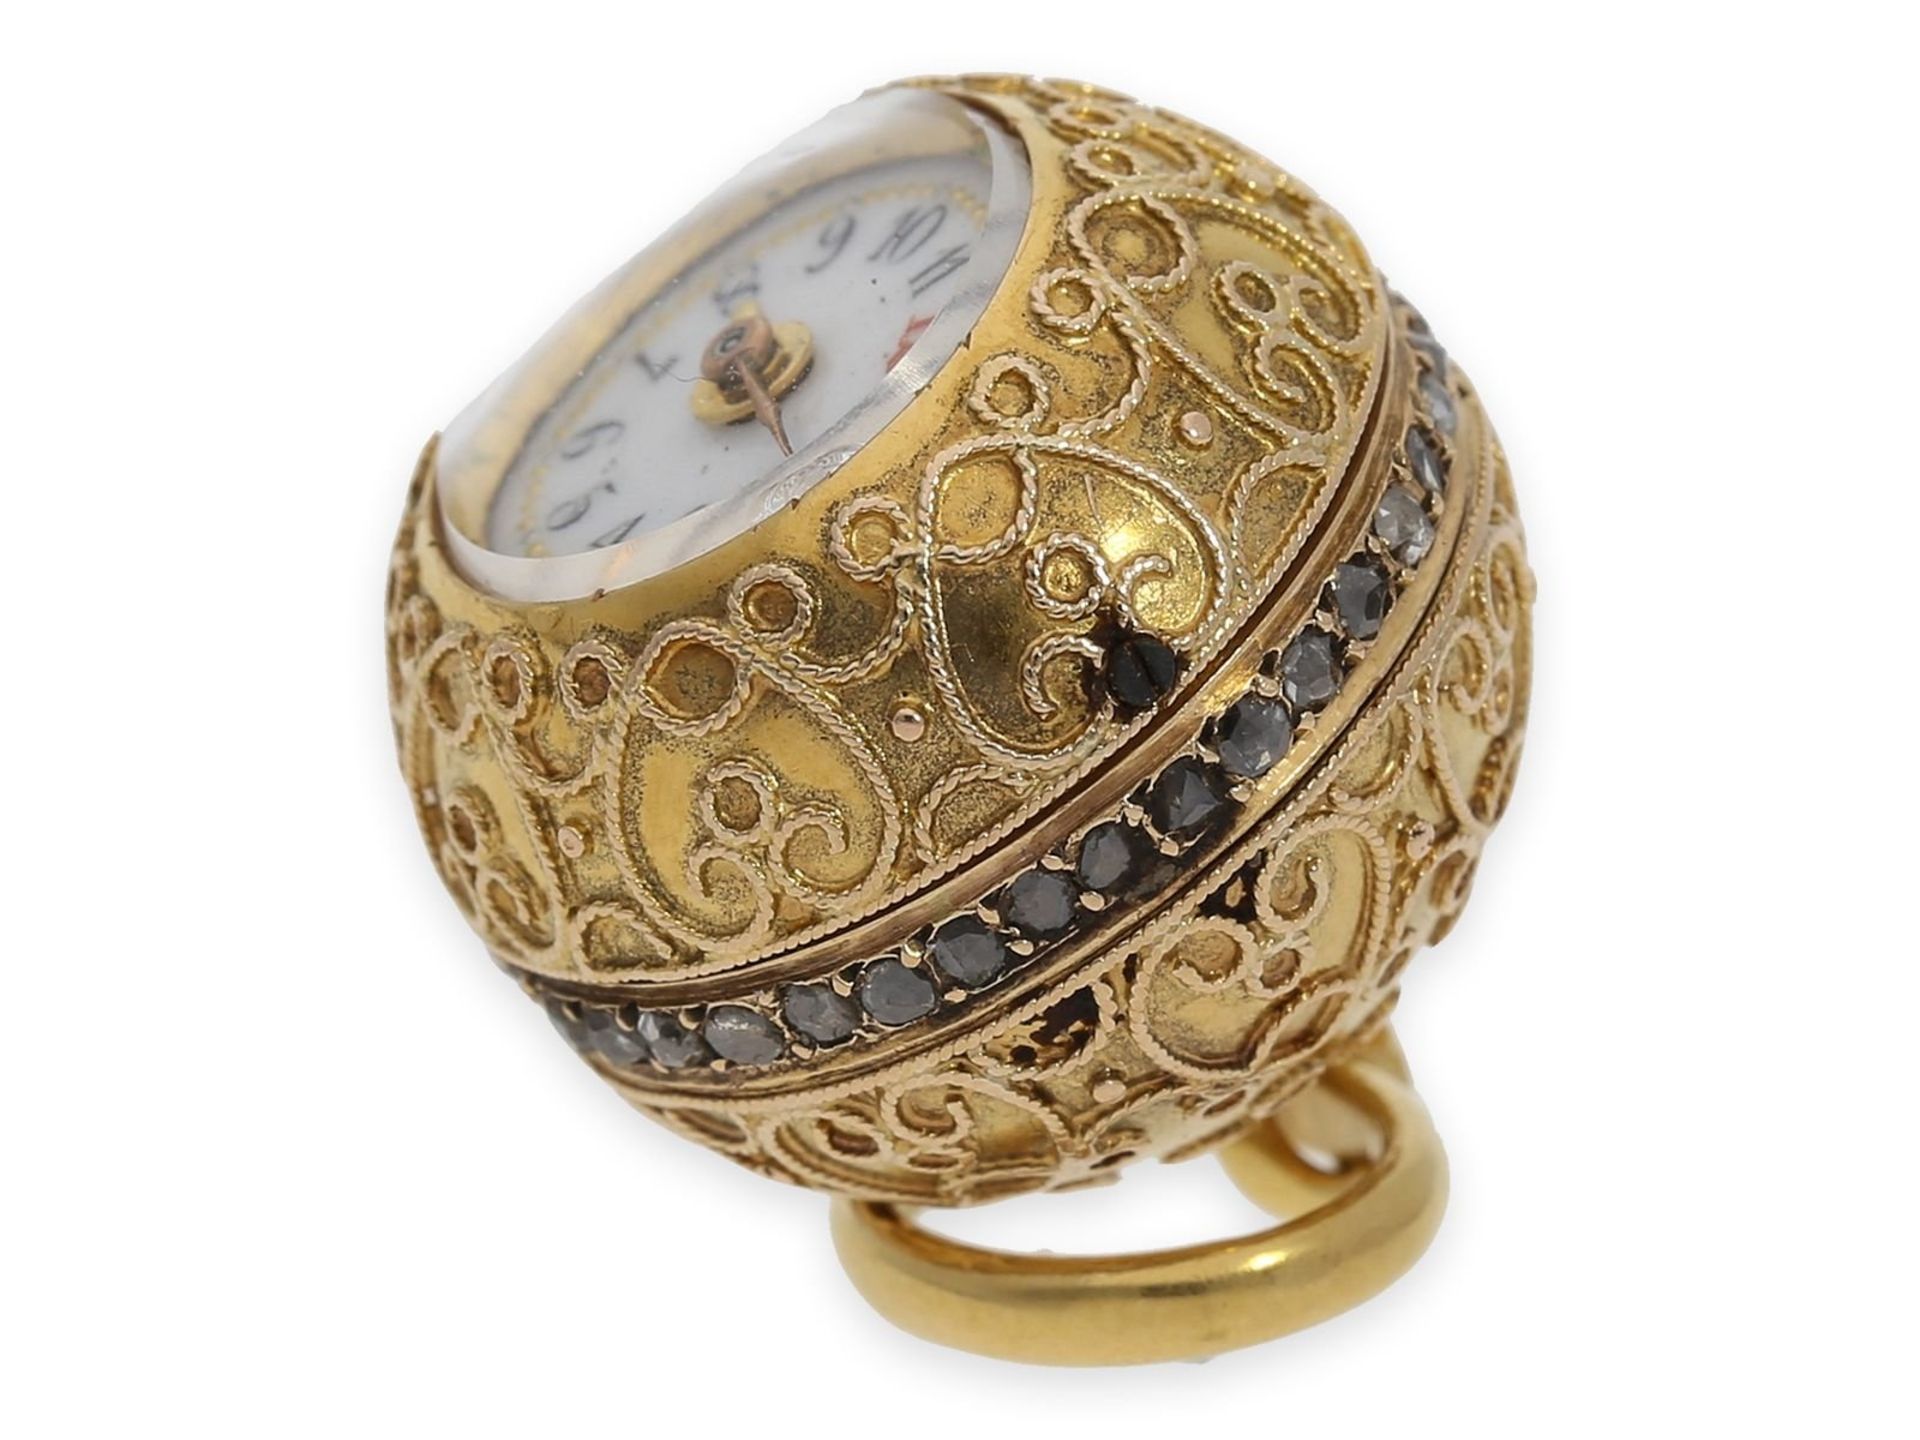 Form watch/ pendant watch: exquisite "Boule de Geneve" ball form watch with granulation and diamond  - Image 3 of 6